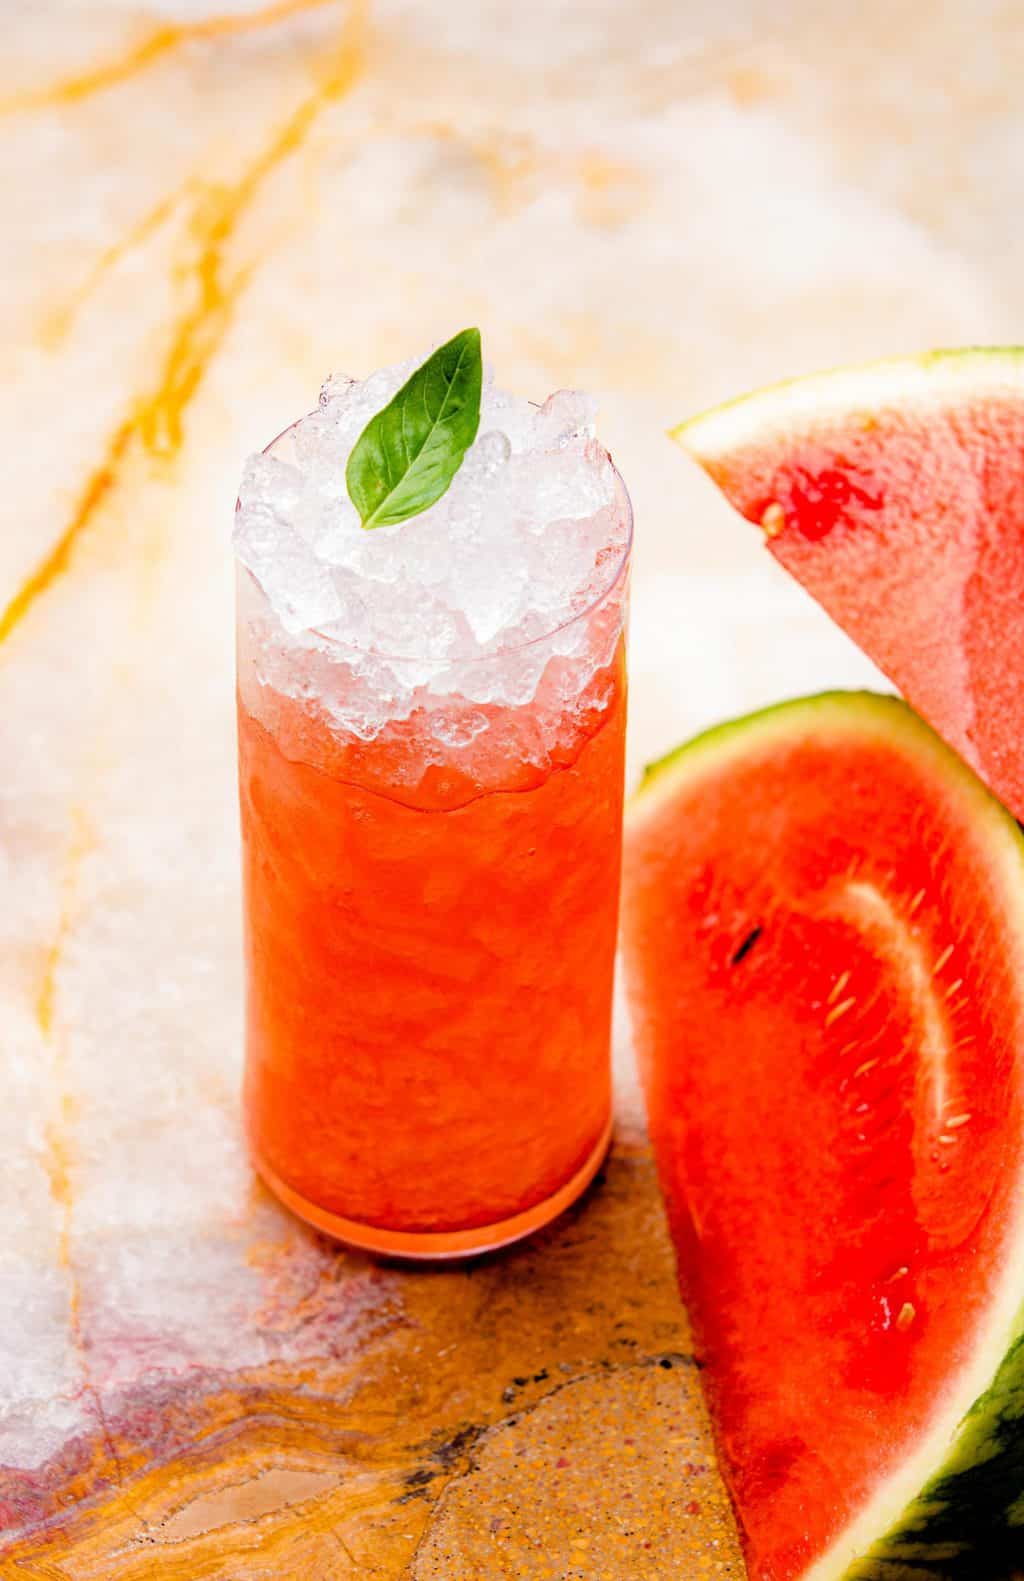 How to Put Vodka in a Watermelon